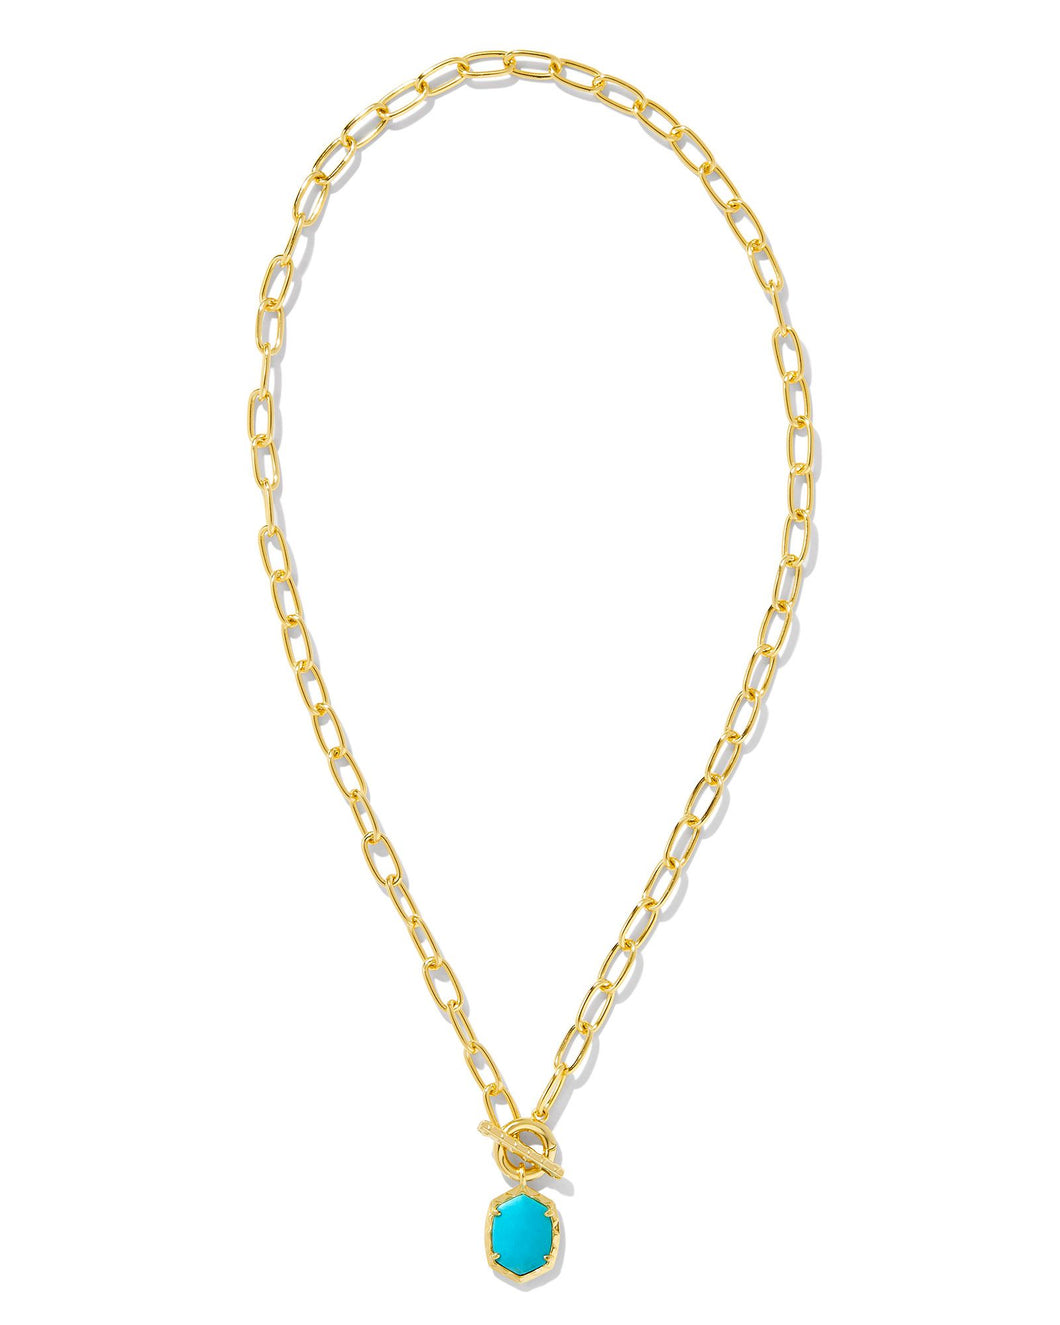 Daphne Gold Link and Chain Necklace in Variegated Turquoise Magnesite